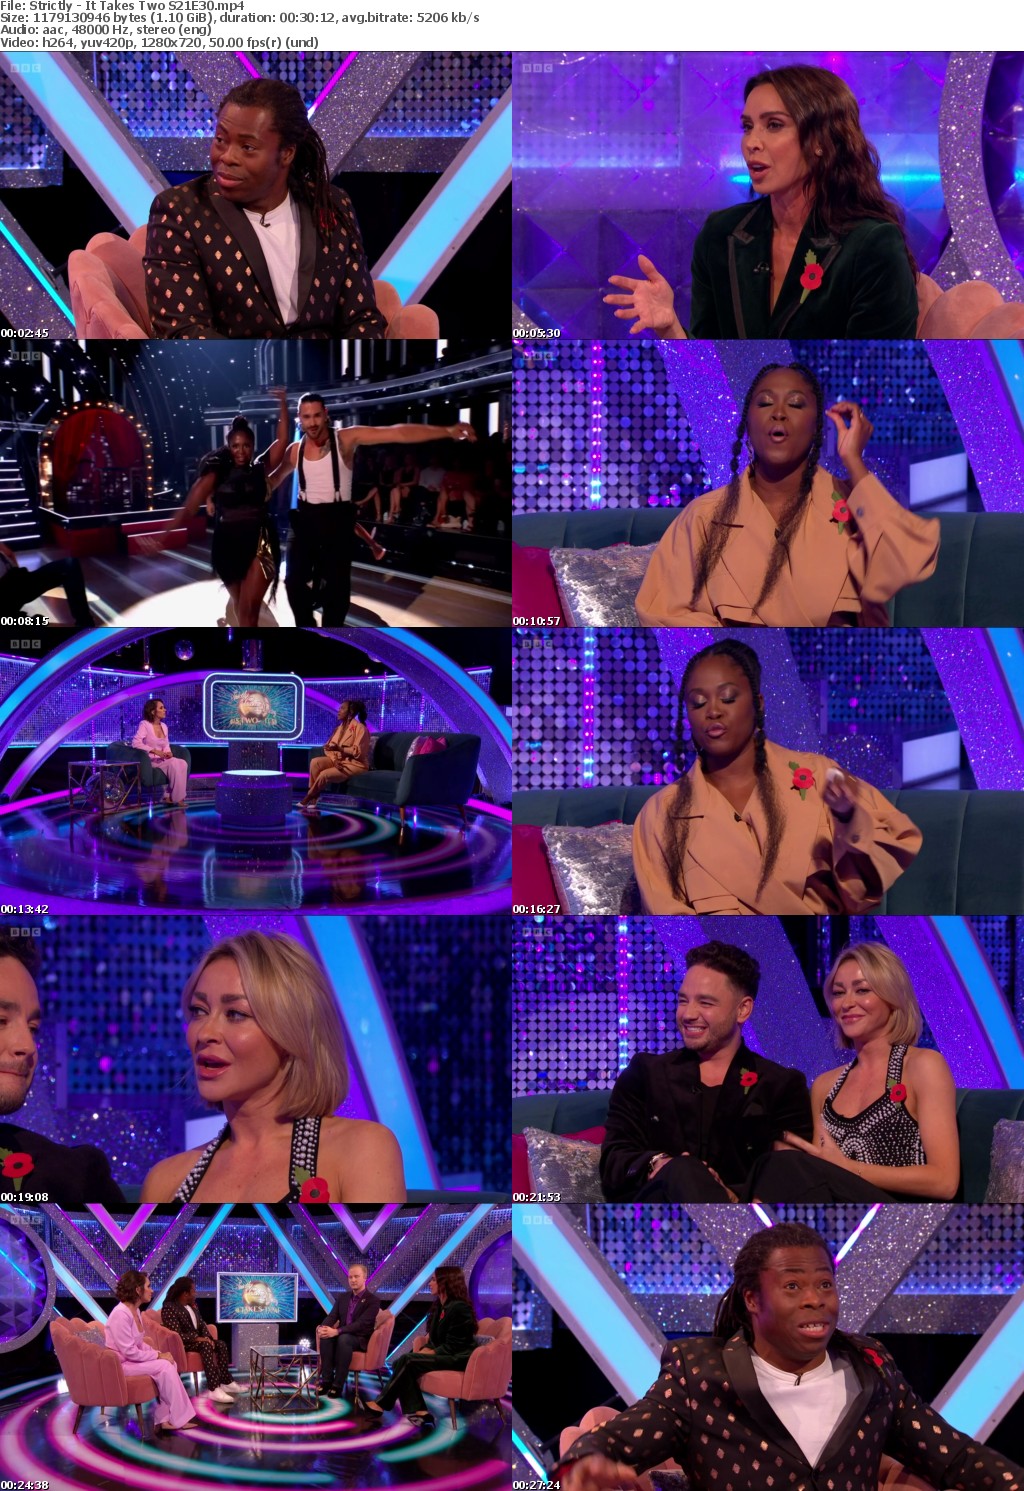 Strictly - It Takes Two S21E30 (1280x720p HD, 50fps, soft Eng subs)